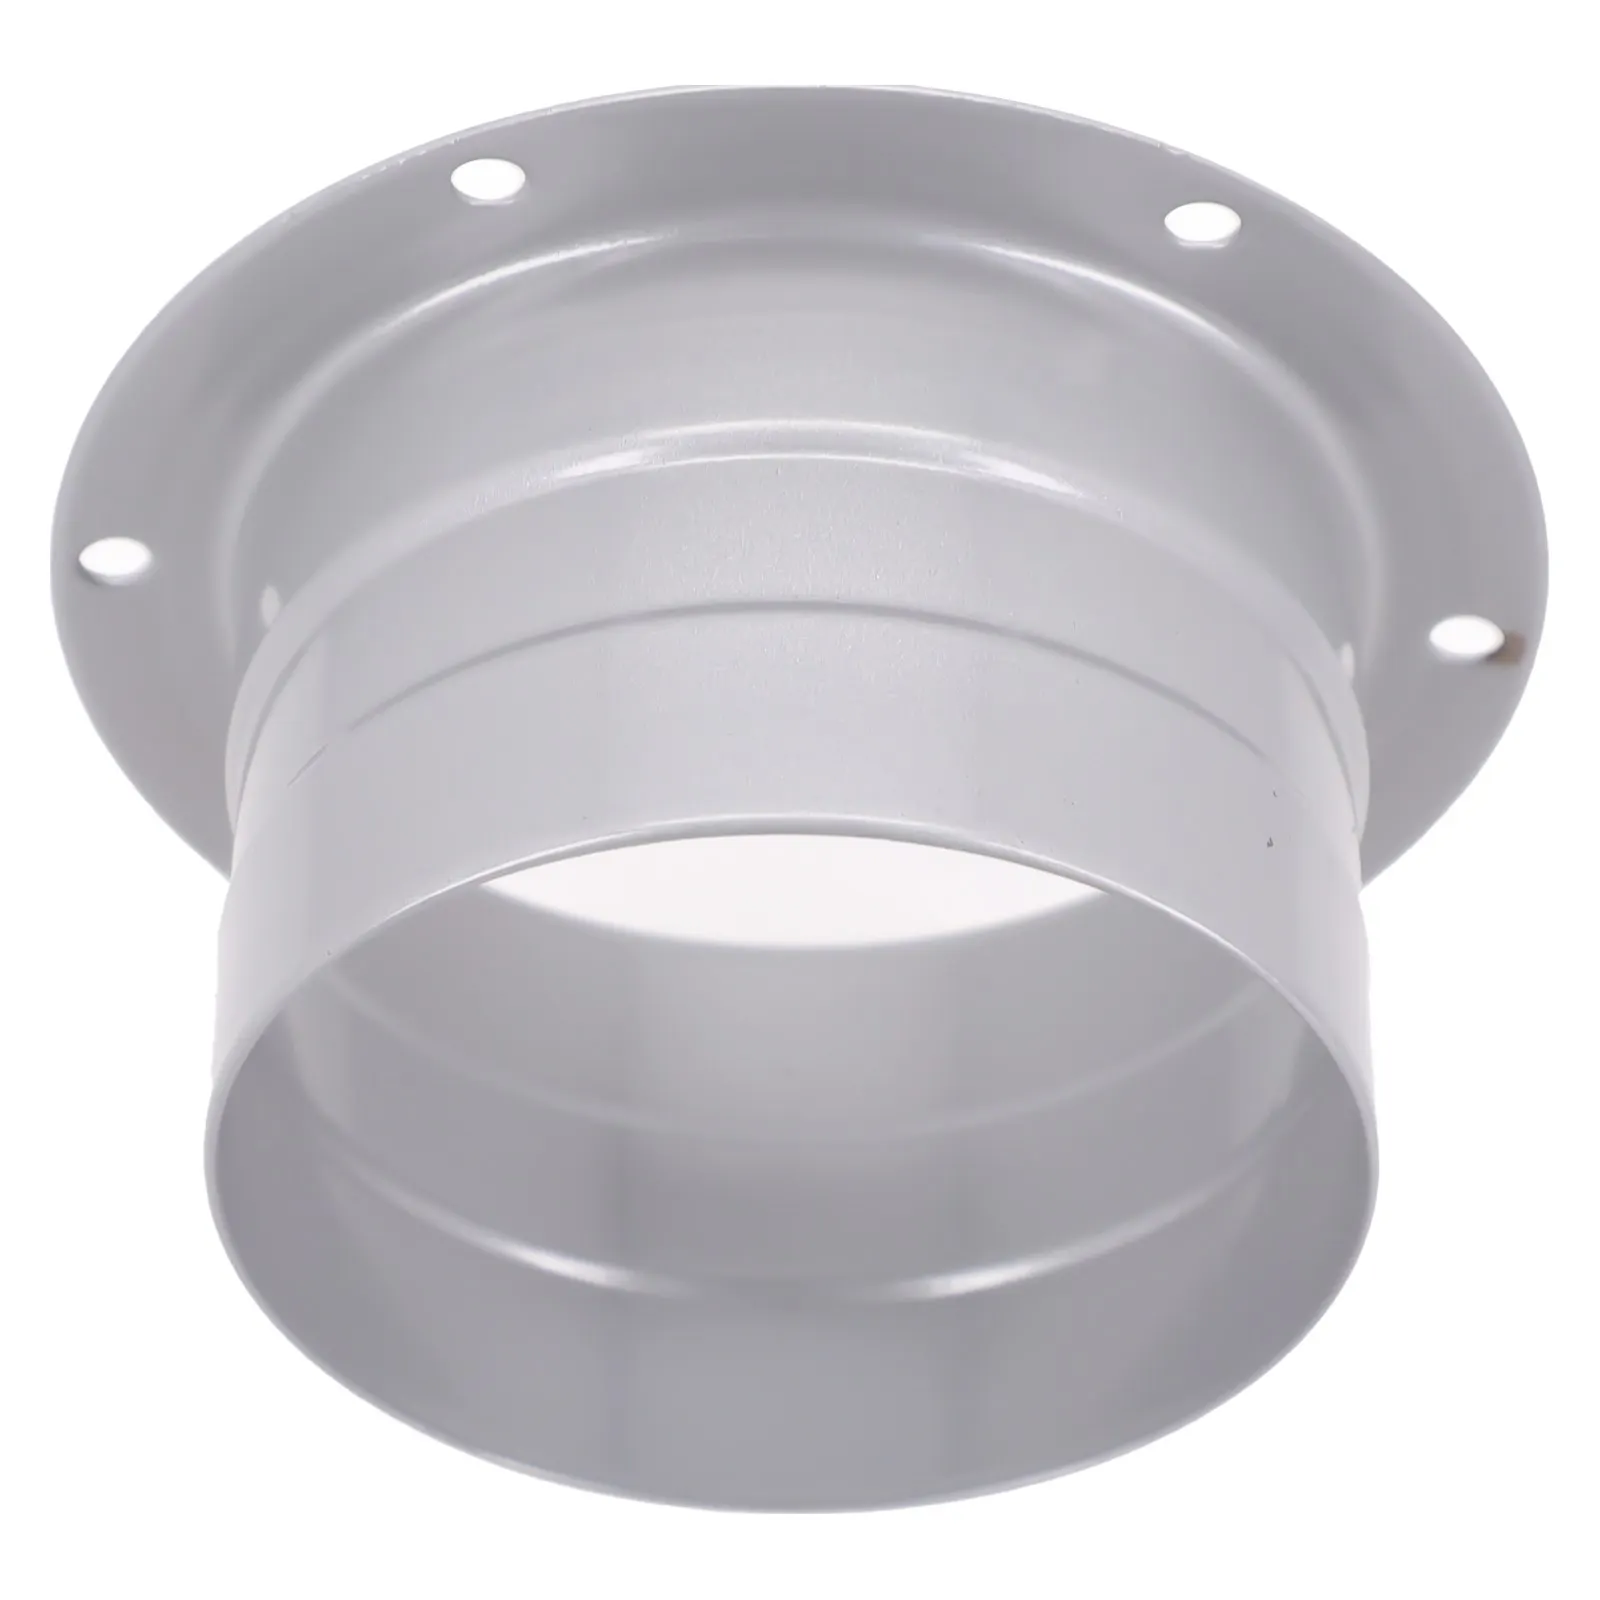 

Adapter Flange Connection Flange Flange Adapter Galvanized Gray Metal Vent Pipe Wall 100mm 120mm 1pcs 200mm None Brand New